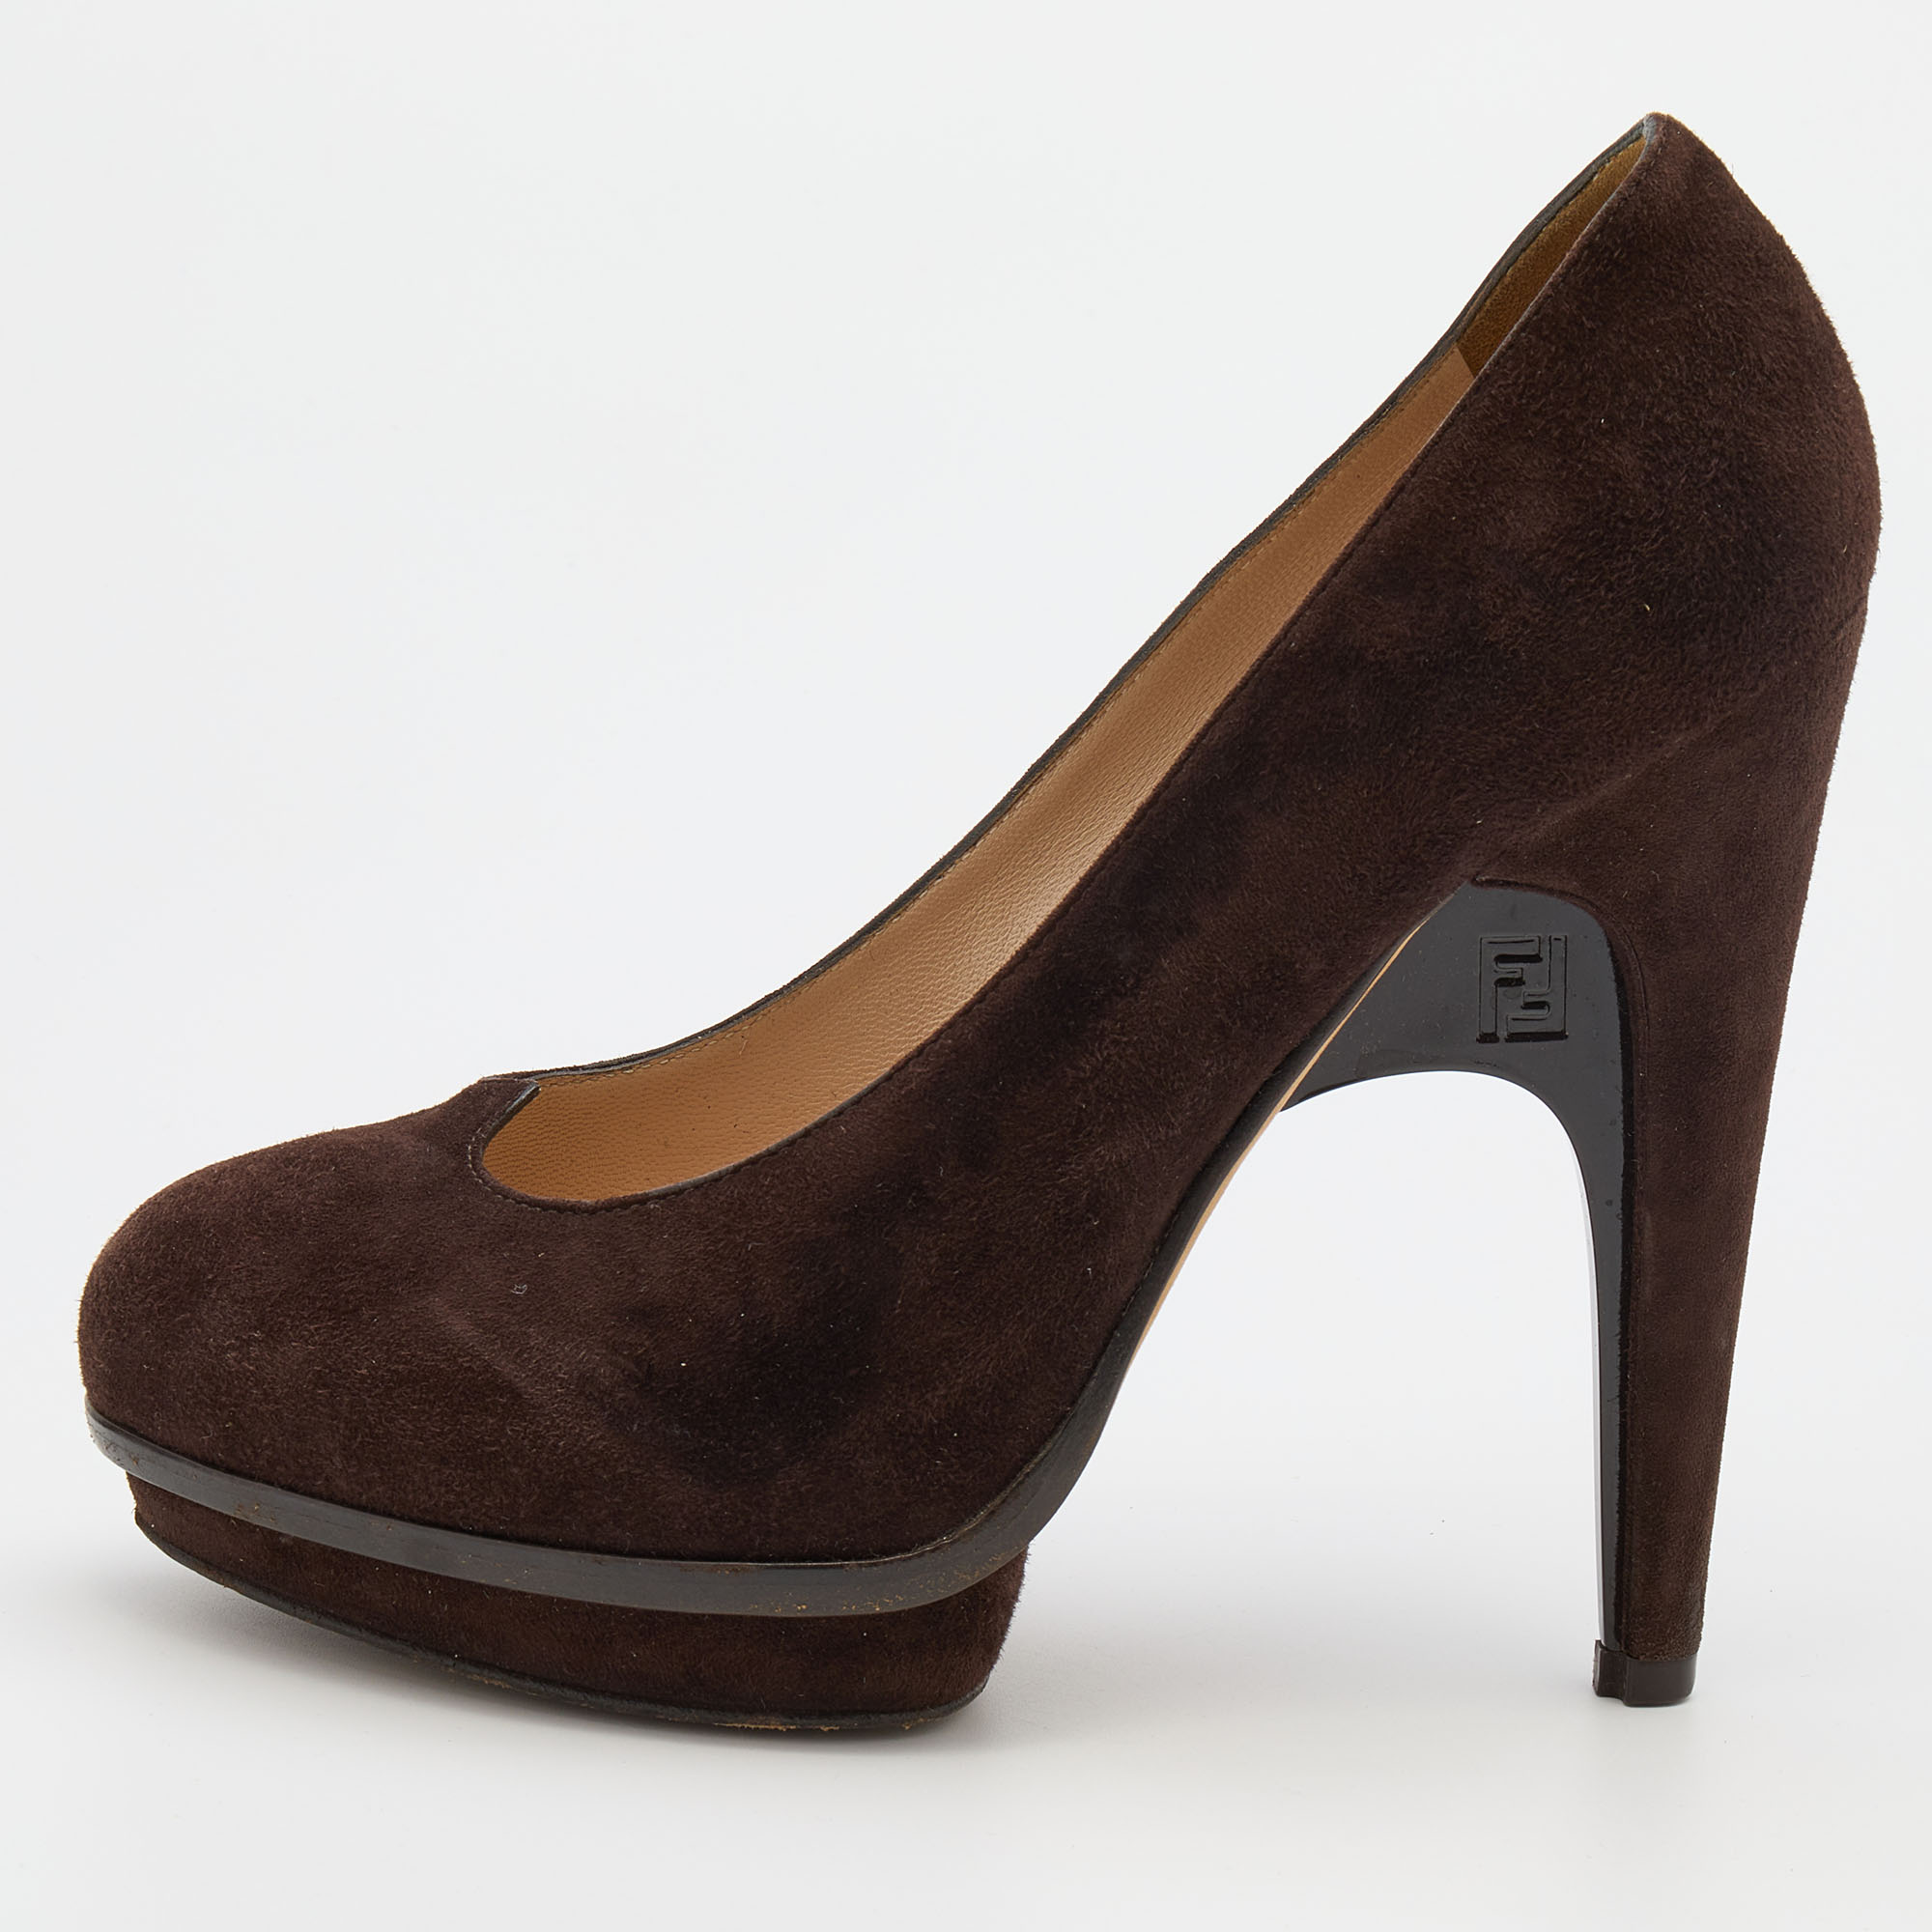 Pre-owned Fendi Brown Suede Pumps Size 38.5